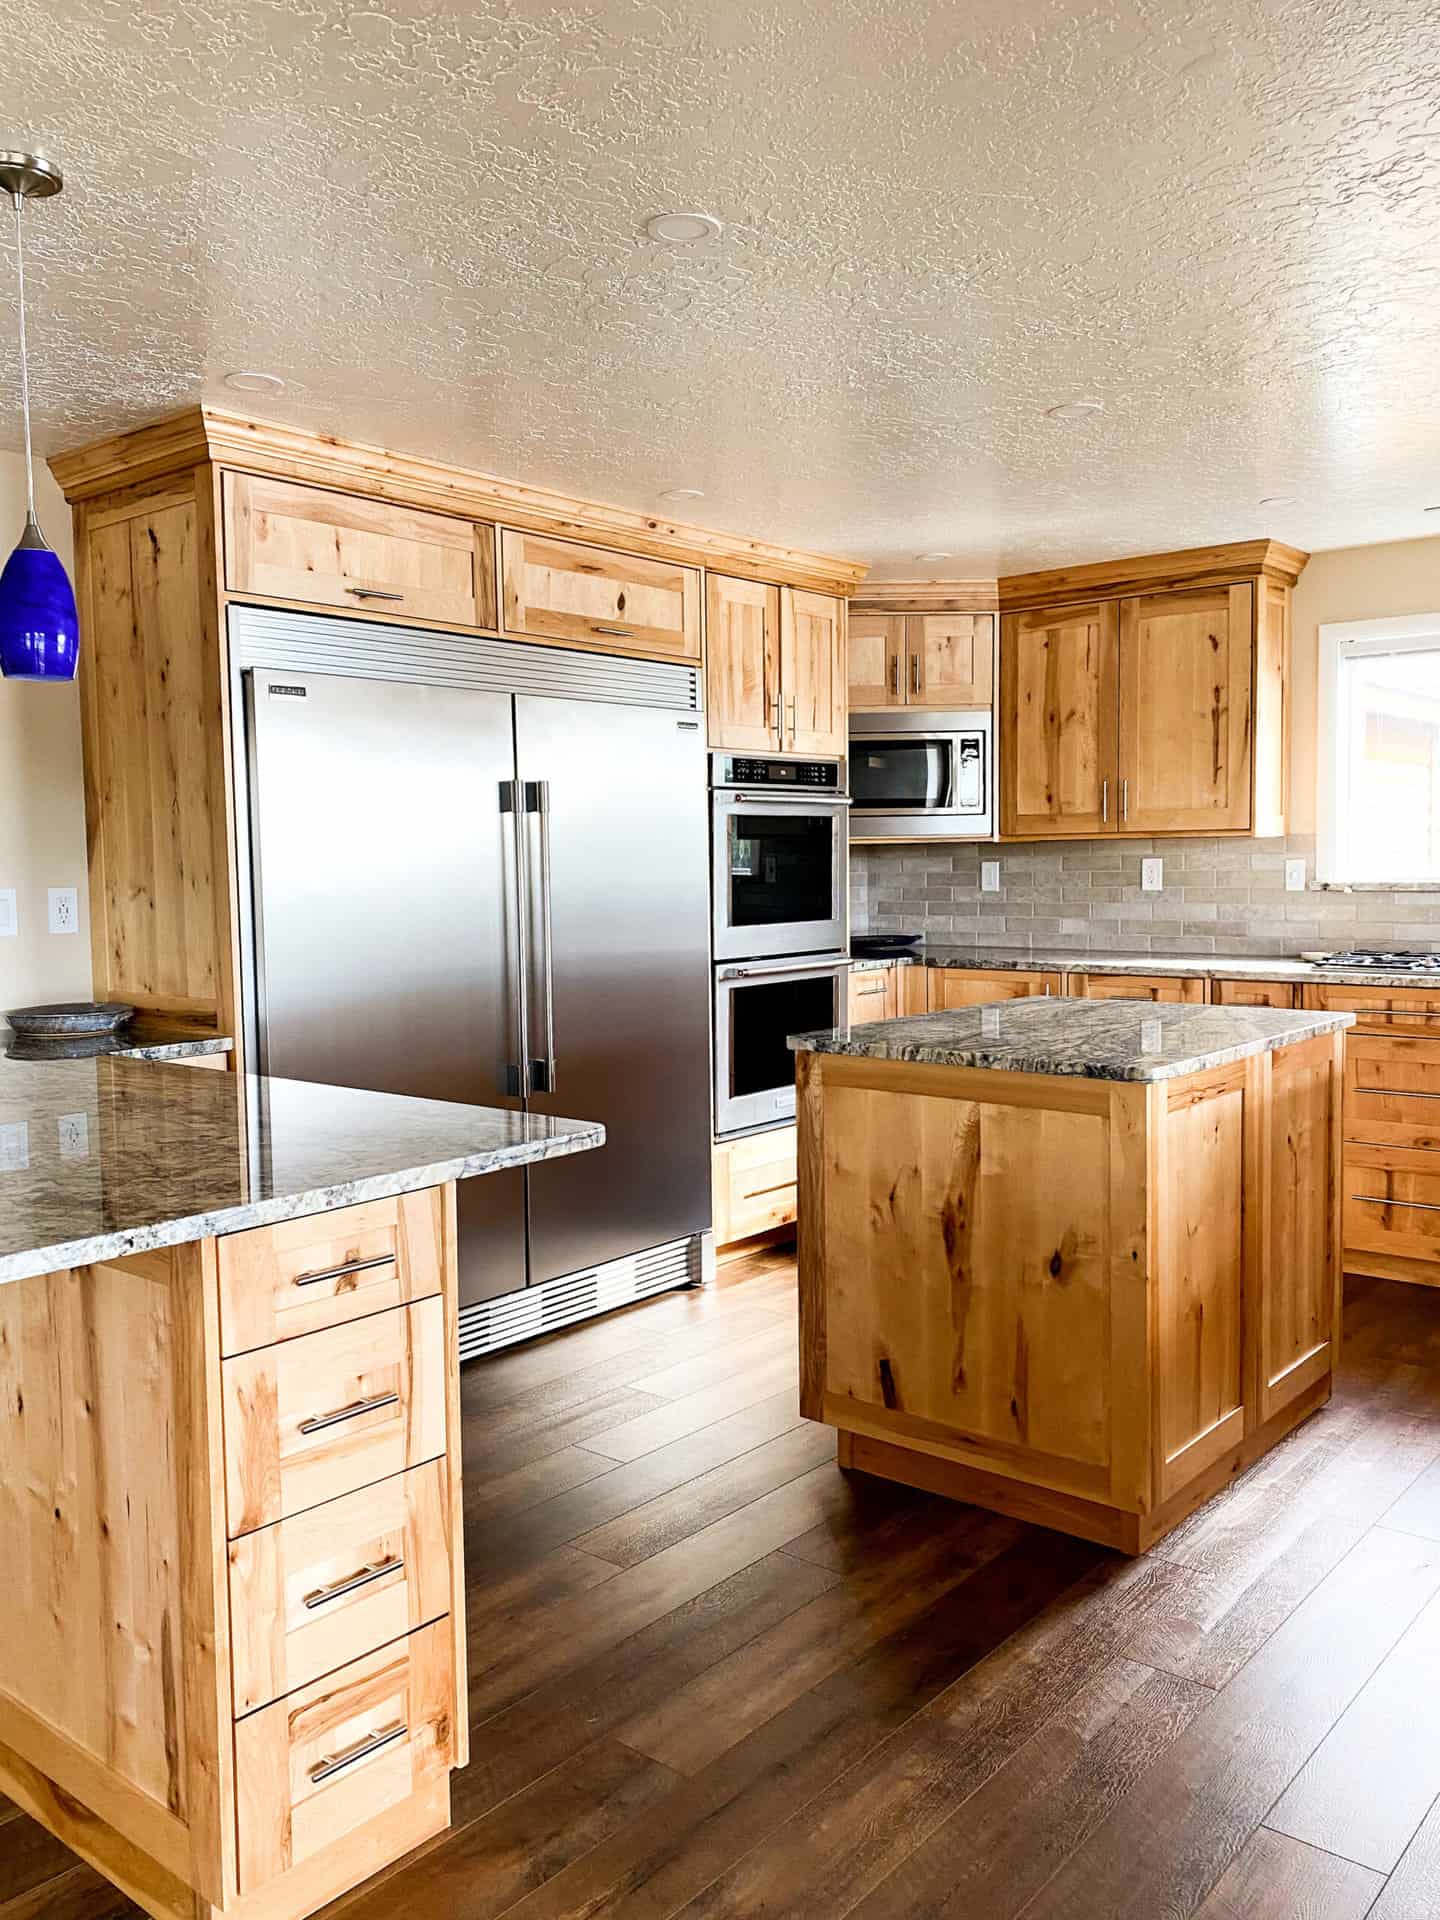 kitchen with all brown wooden cabinets